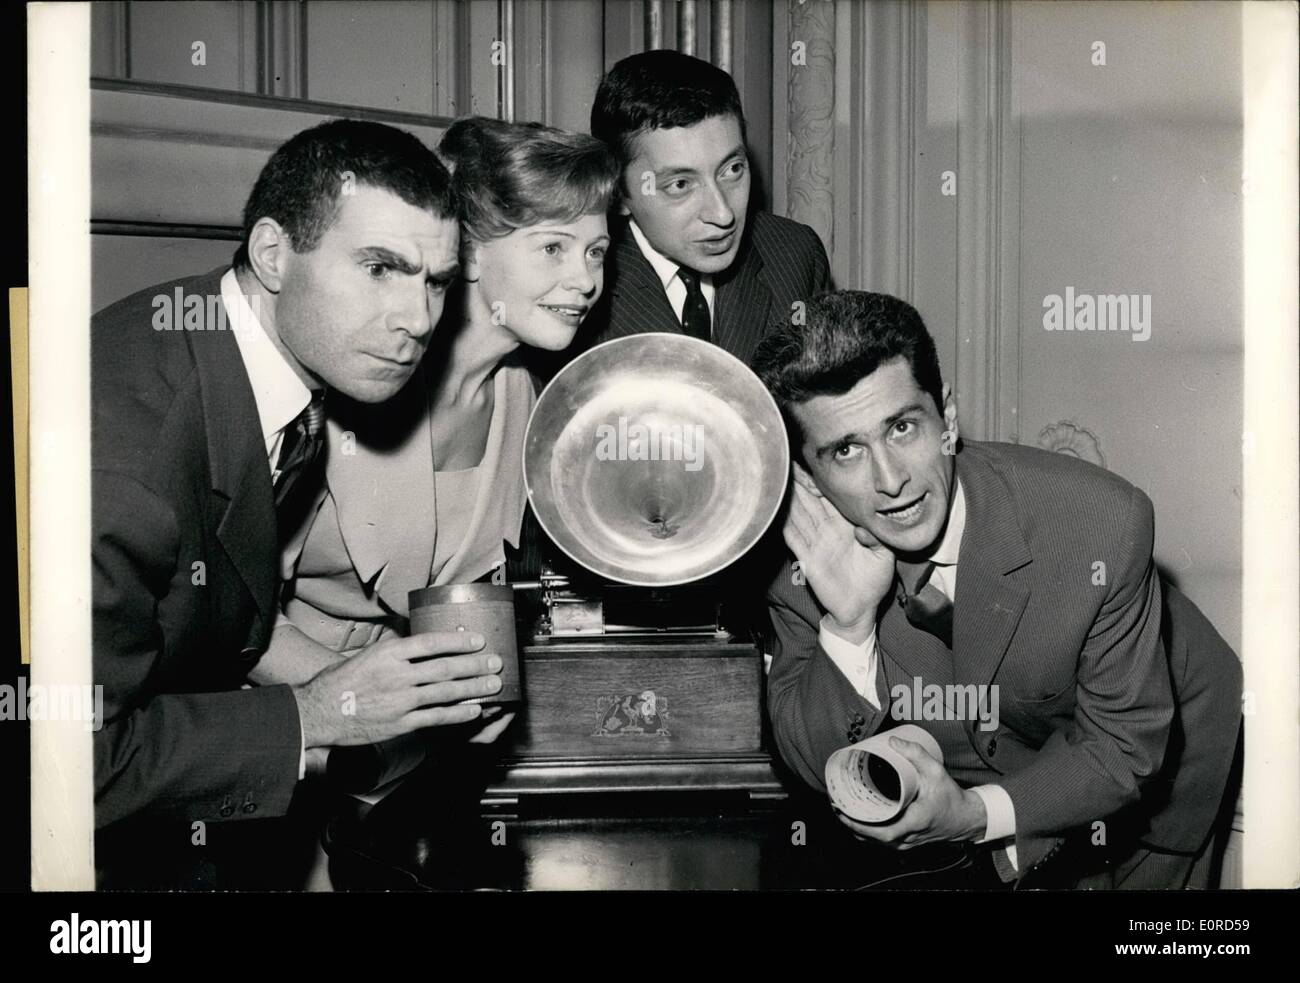 Mar. 03, 1959 - Best Recordings Erwarded: Prizes for the Best recordings were awarded to four young singers by the academy Charles cors in Paris last night. The occasion was the international congress of ''High Fidelity and Stereophony'' now being held in Paris. Picture shows: The Four Prize winners before a gramophone. From left to right: Serge insbourg, Denise Benoit, Marcel amont and Jacques Dufilho. Stock Photo